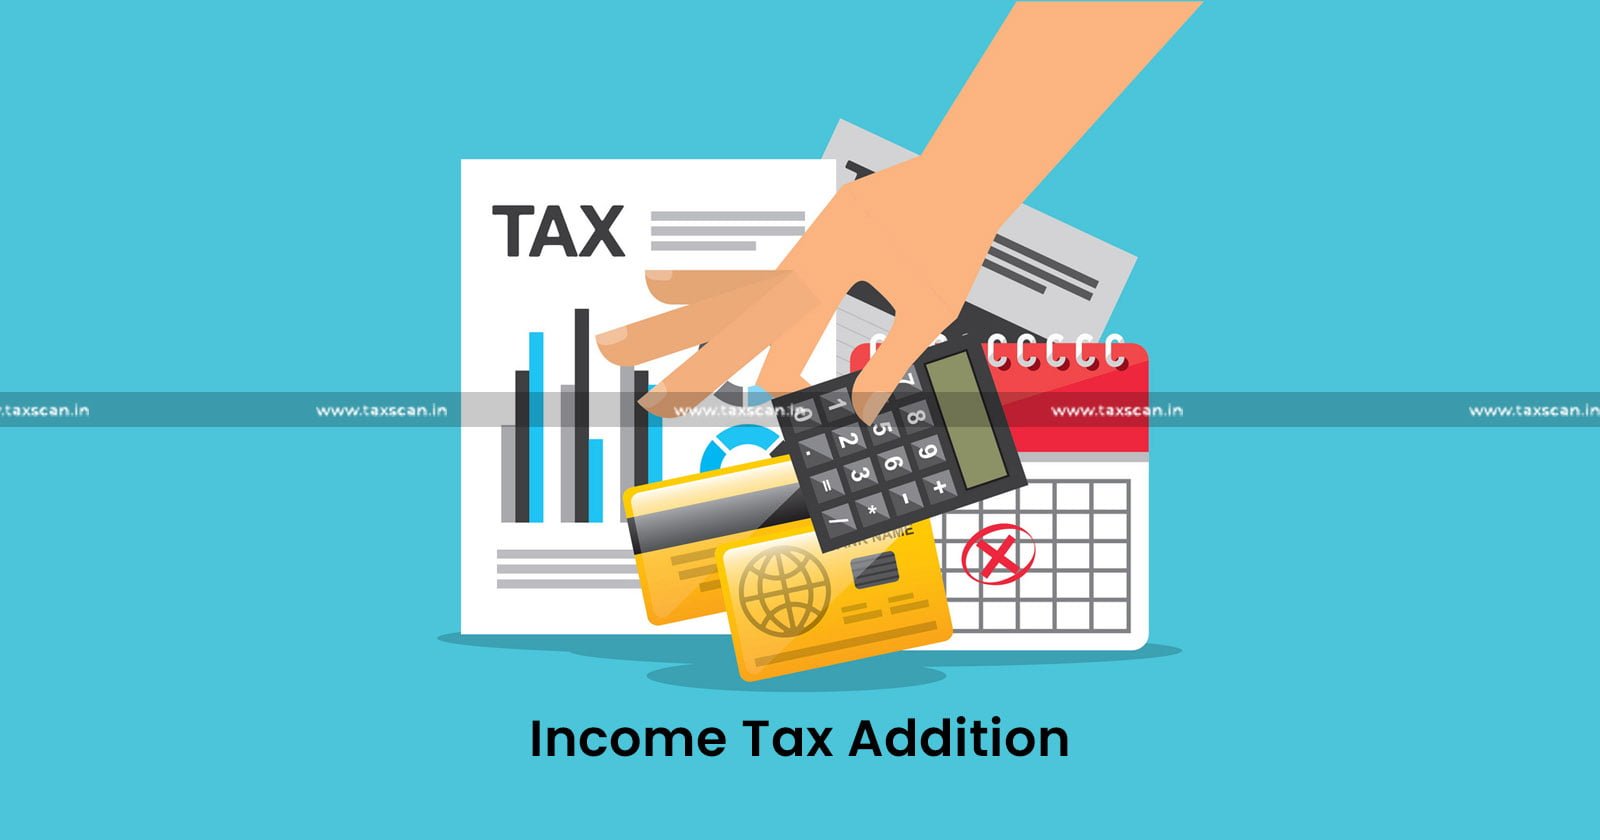 Discharge of Onus - Income Tax Act - Income Tax - Furnishing Identity and Creditworthiness of Parties - Furnishing Identity - Creditworthiness - ITAT - Income Tax Addition - taxscan